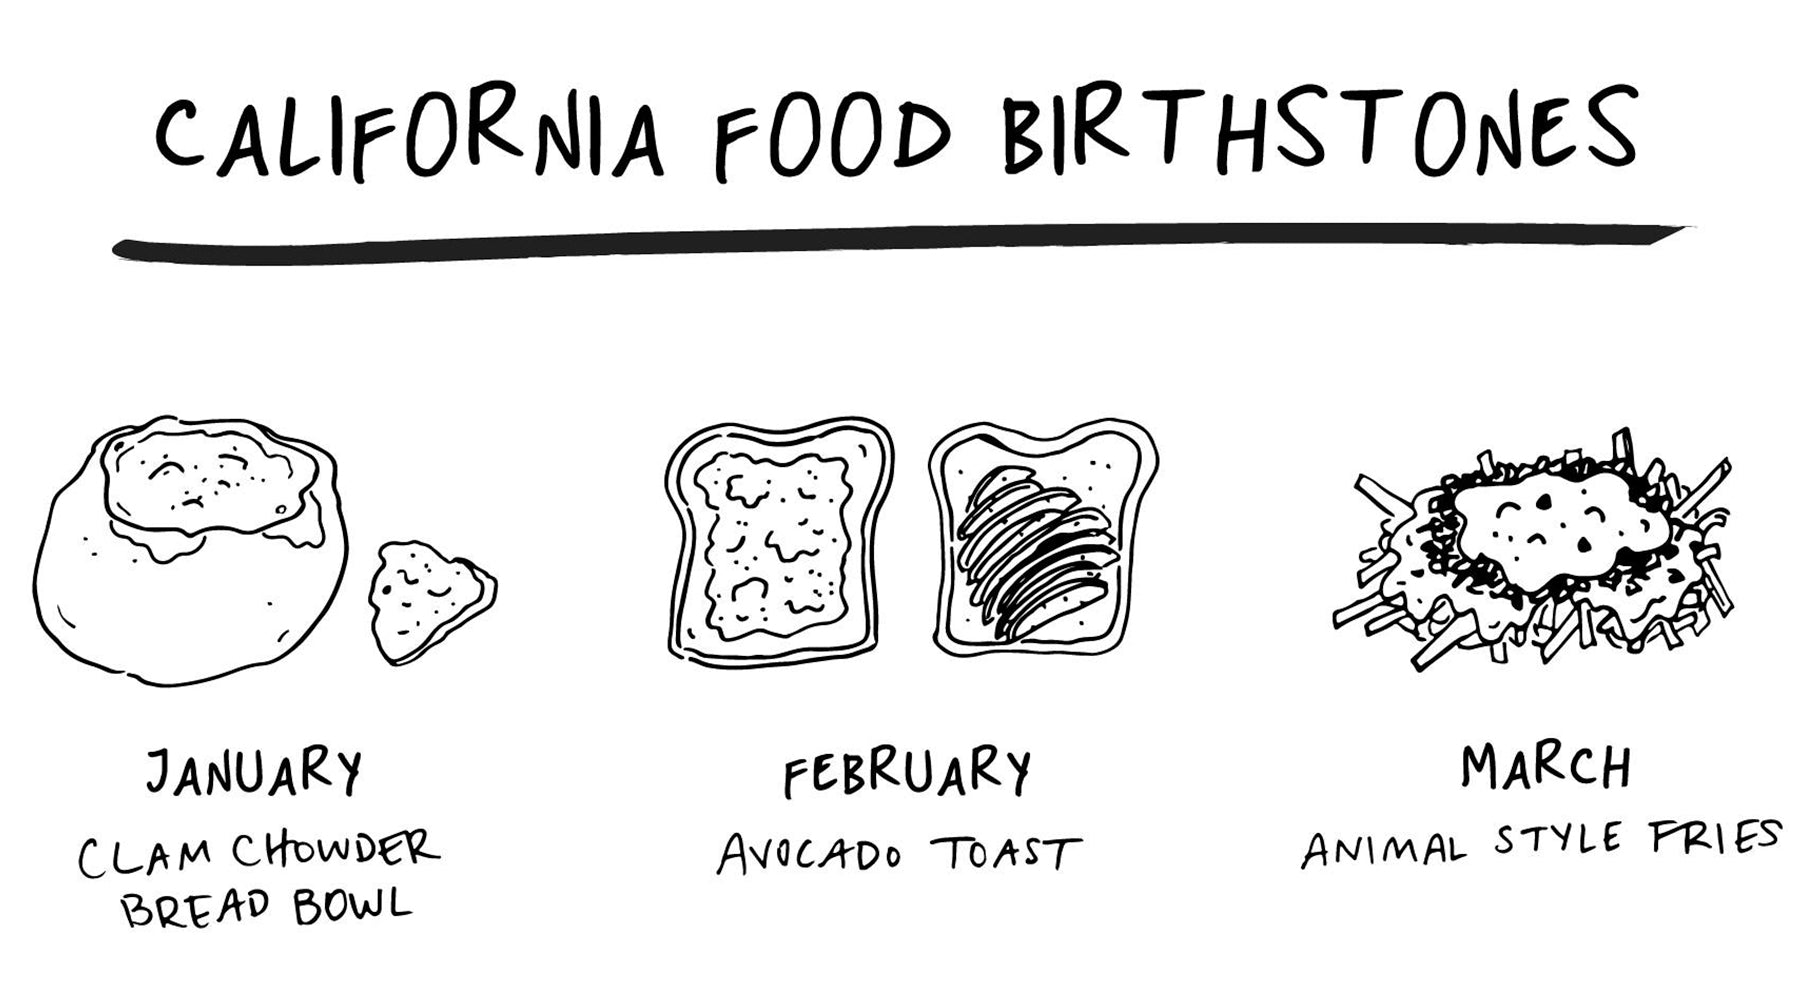 What's Your California Food Birthstone?